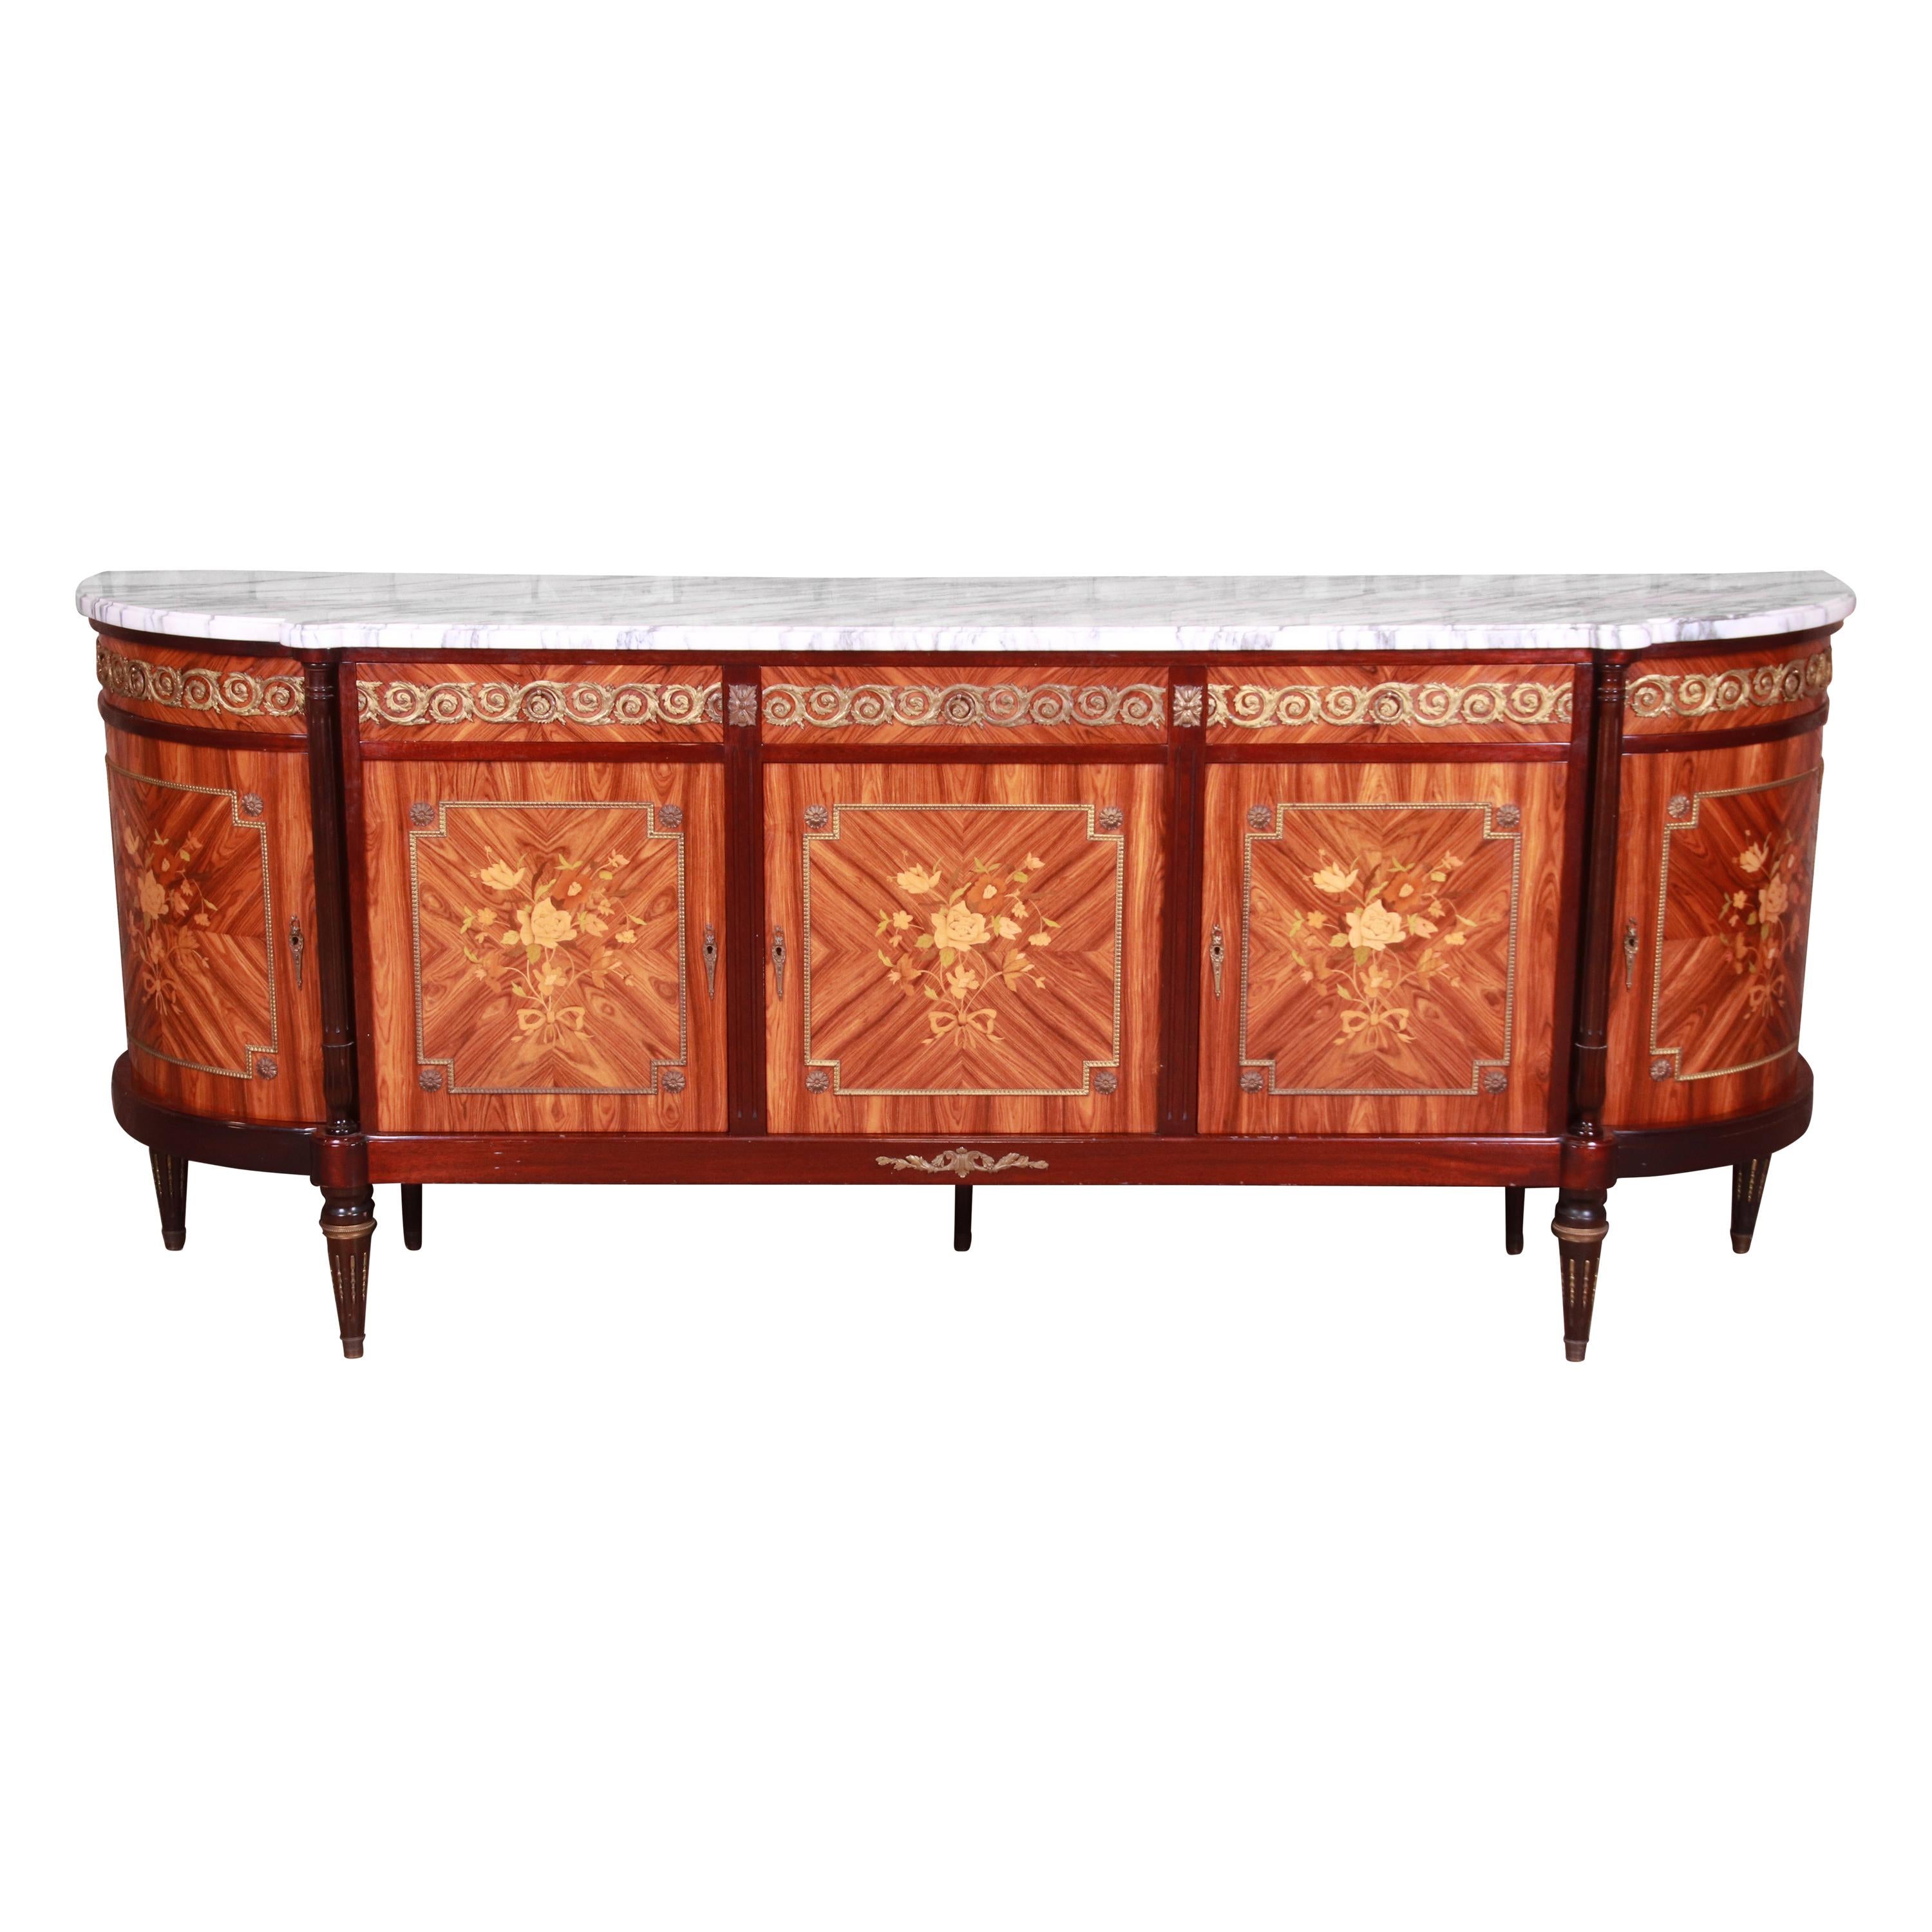 French Louis XVI Kingwood Inlaid Marquetry Marble Top Bronze Mounted Sideboard